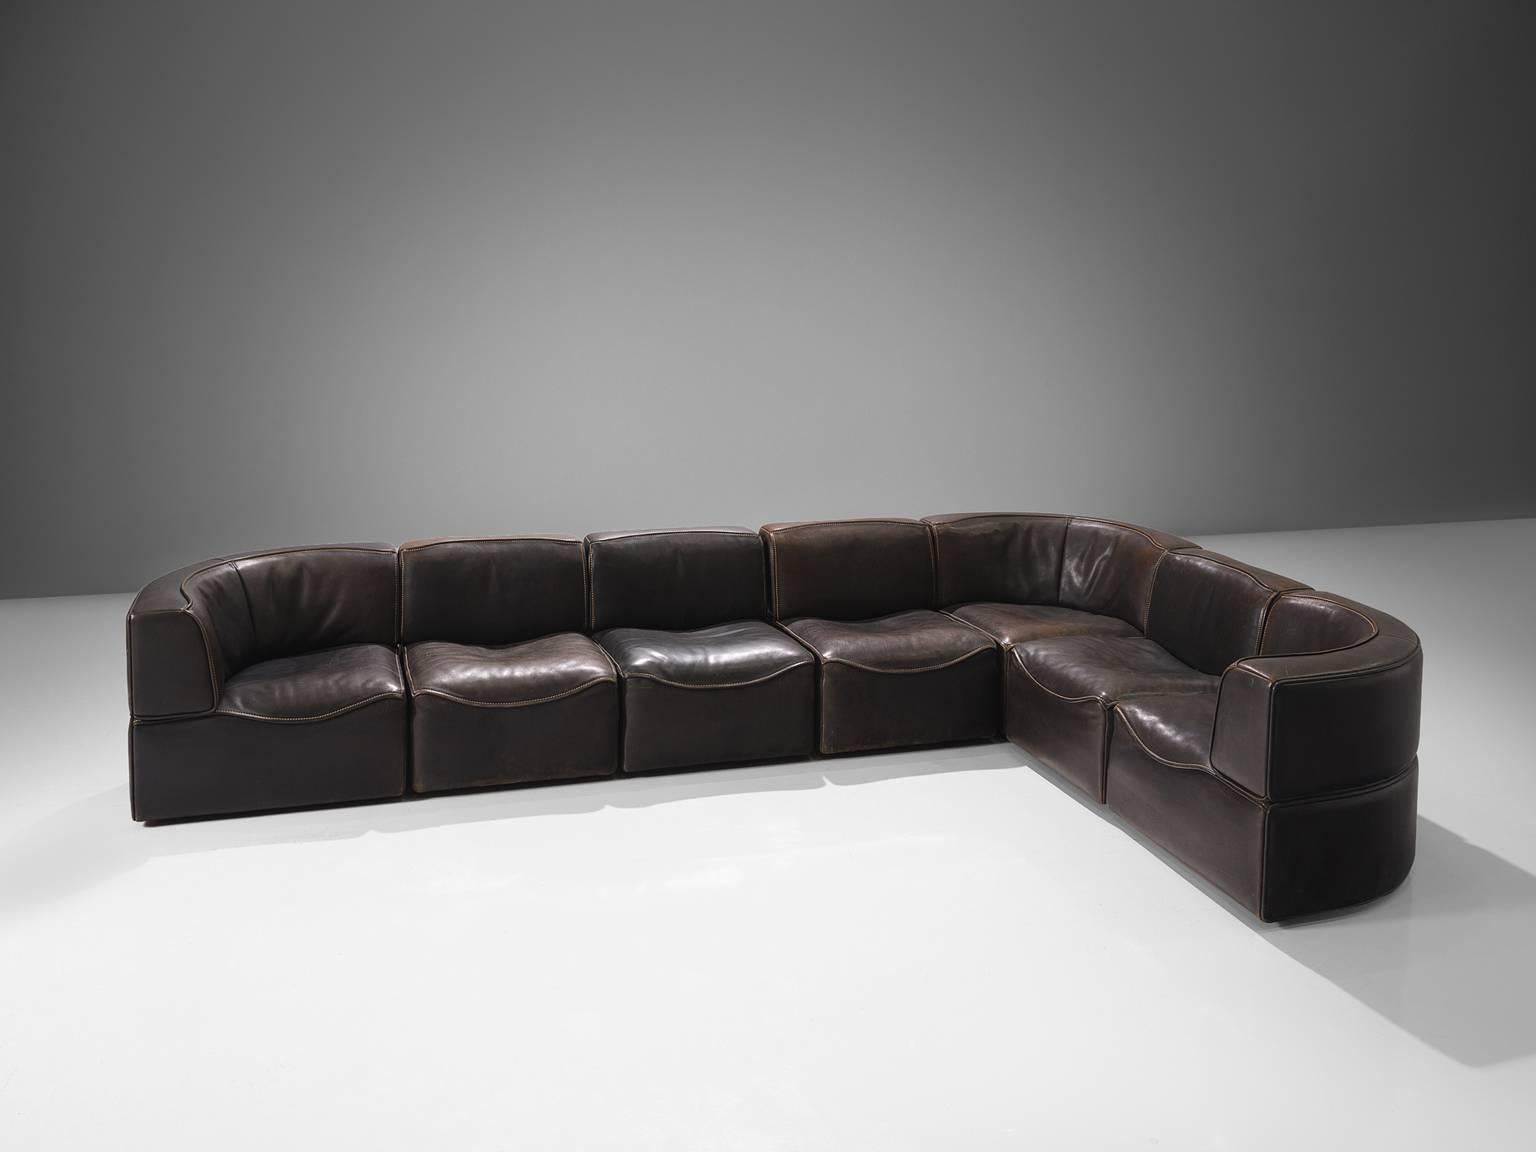 De Sede', DS15 sofa, patinated brown leather, seven elements, Switzerland, 1970s.

Thick, high-quality modular sofa made by De Sede in Switzerland in the 1970s. Due to the separate elements, the couch can be used in a variety of different